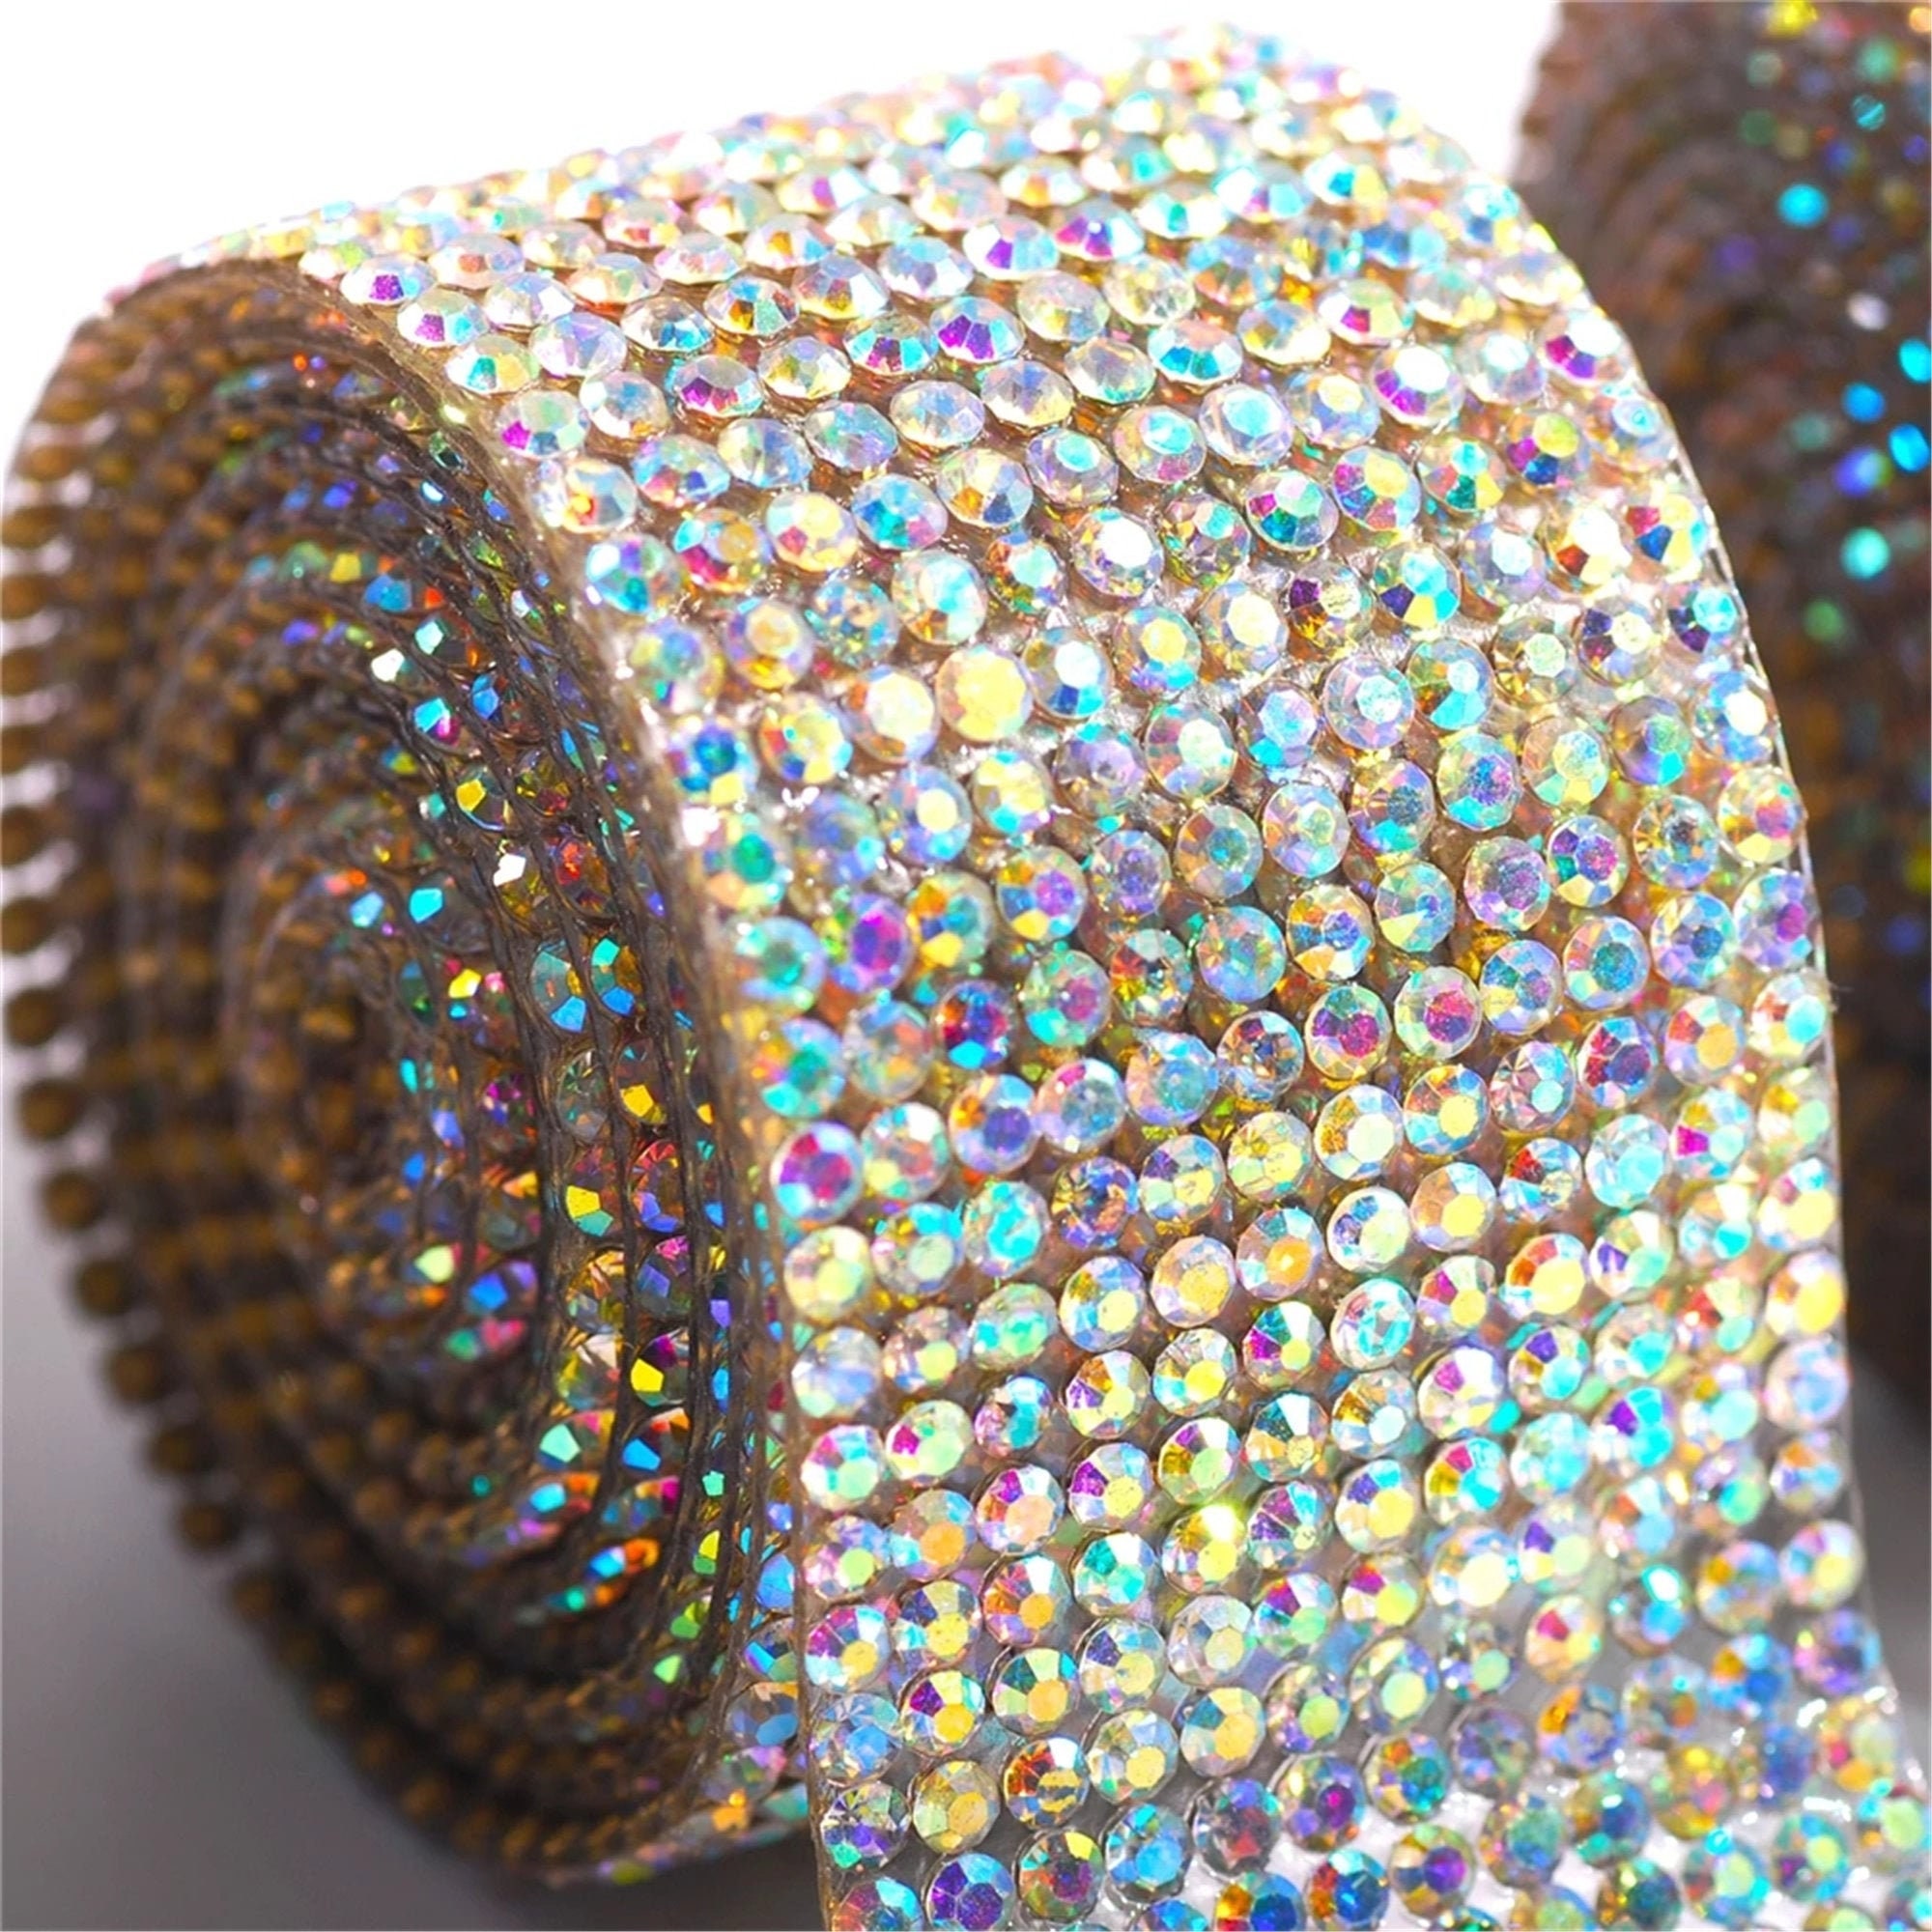 5 Mm CLEAR Self Adhesive Rhinestone Strips Circle Bling Stickers 646 Pieces  Wedding Favor Boxes, DIY Iphone, Card Making, Embellishments 